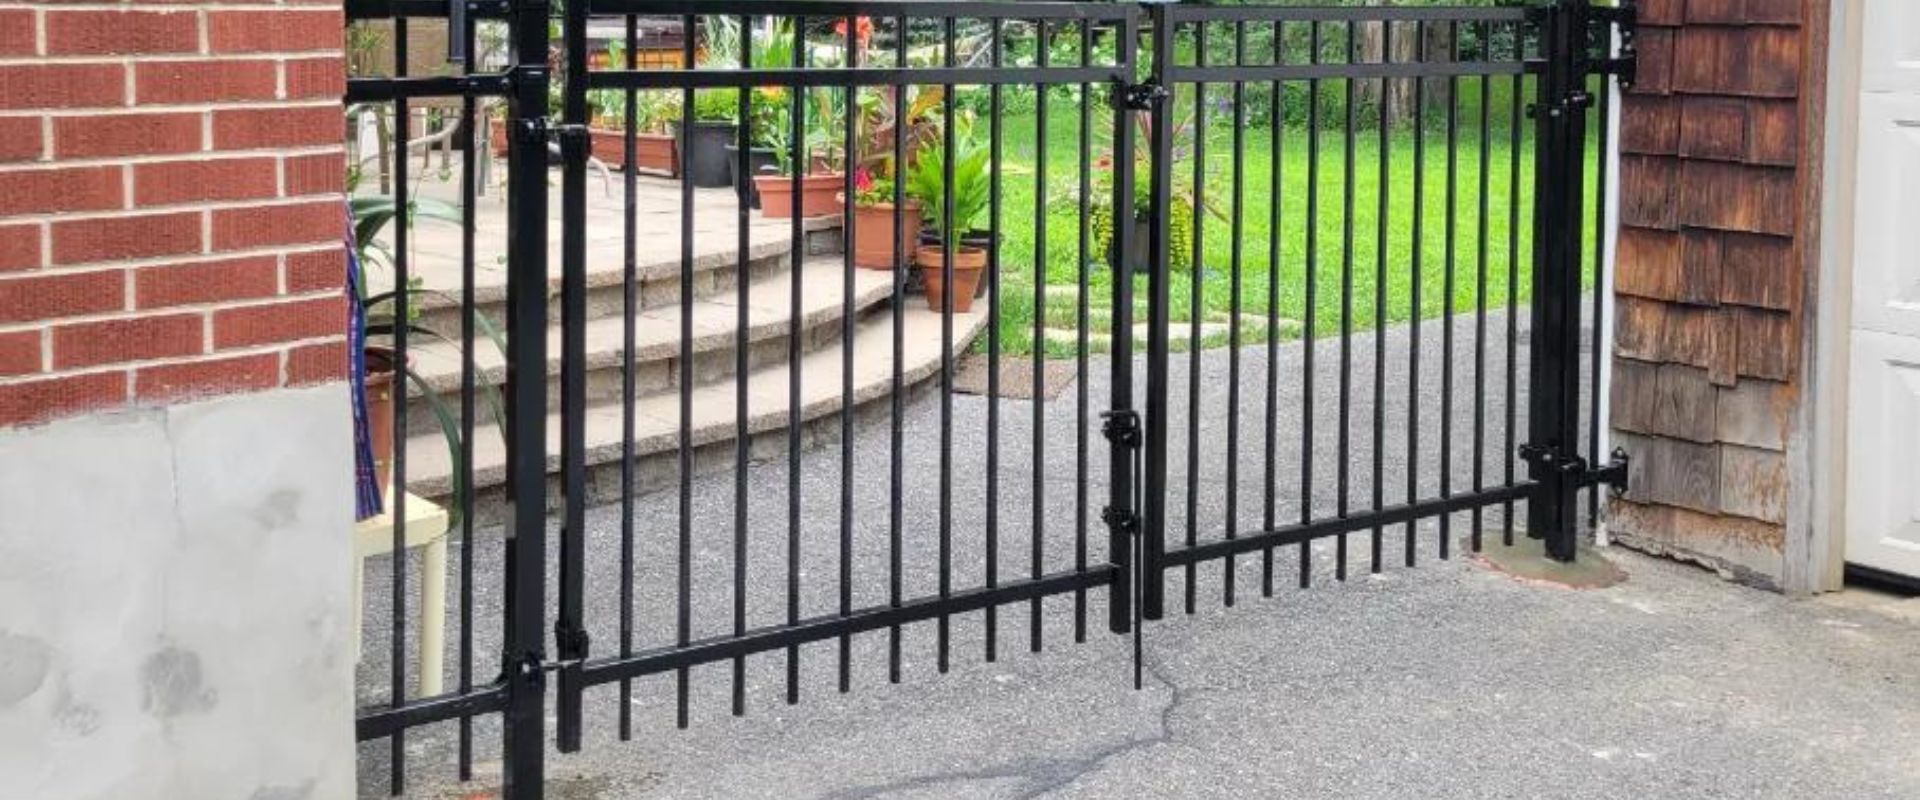 Ottawa Fence Removal and Disposal